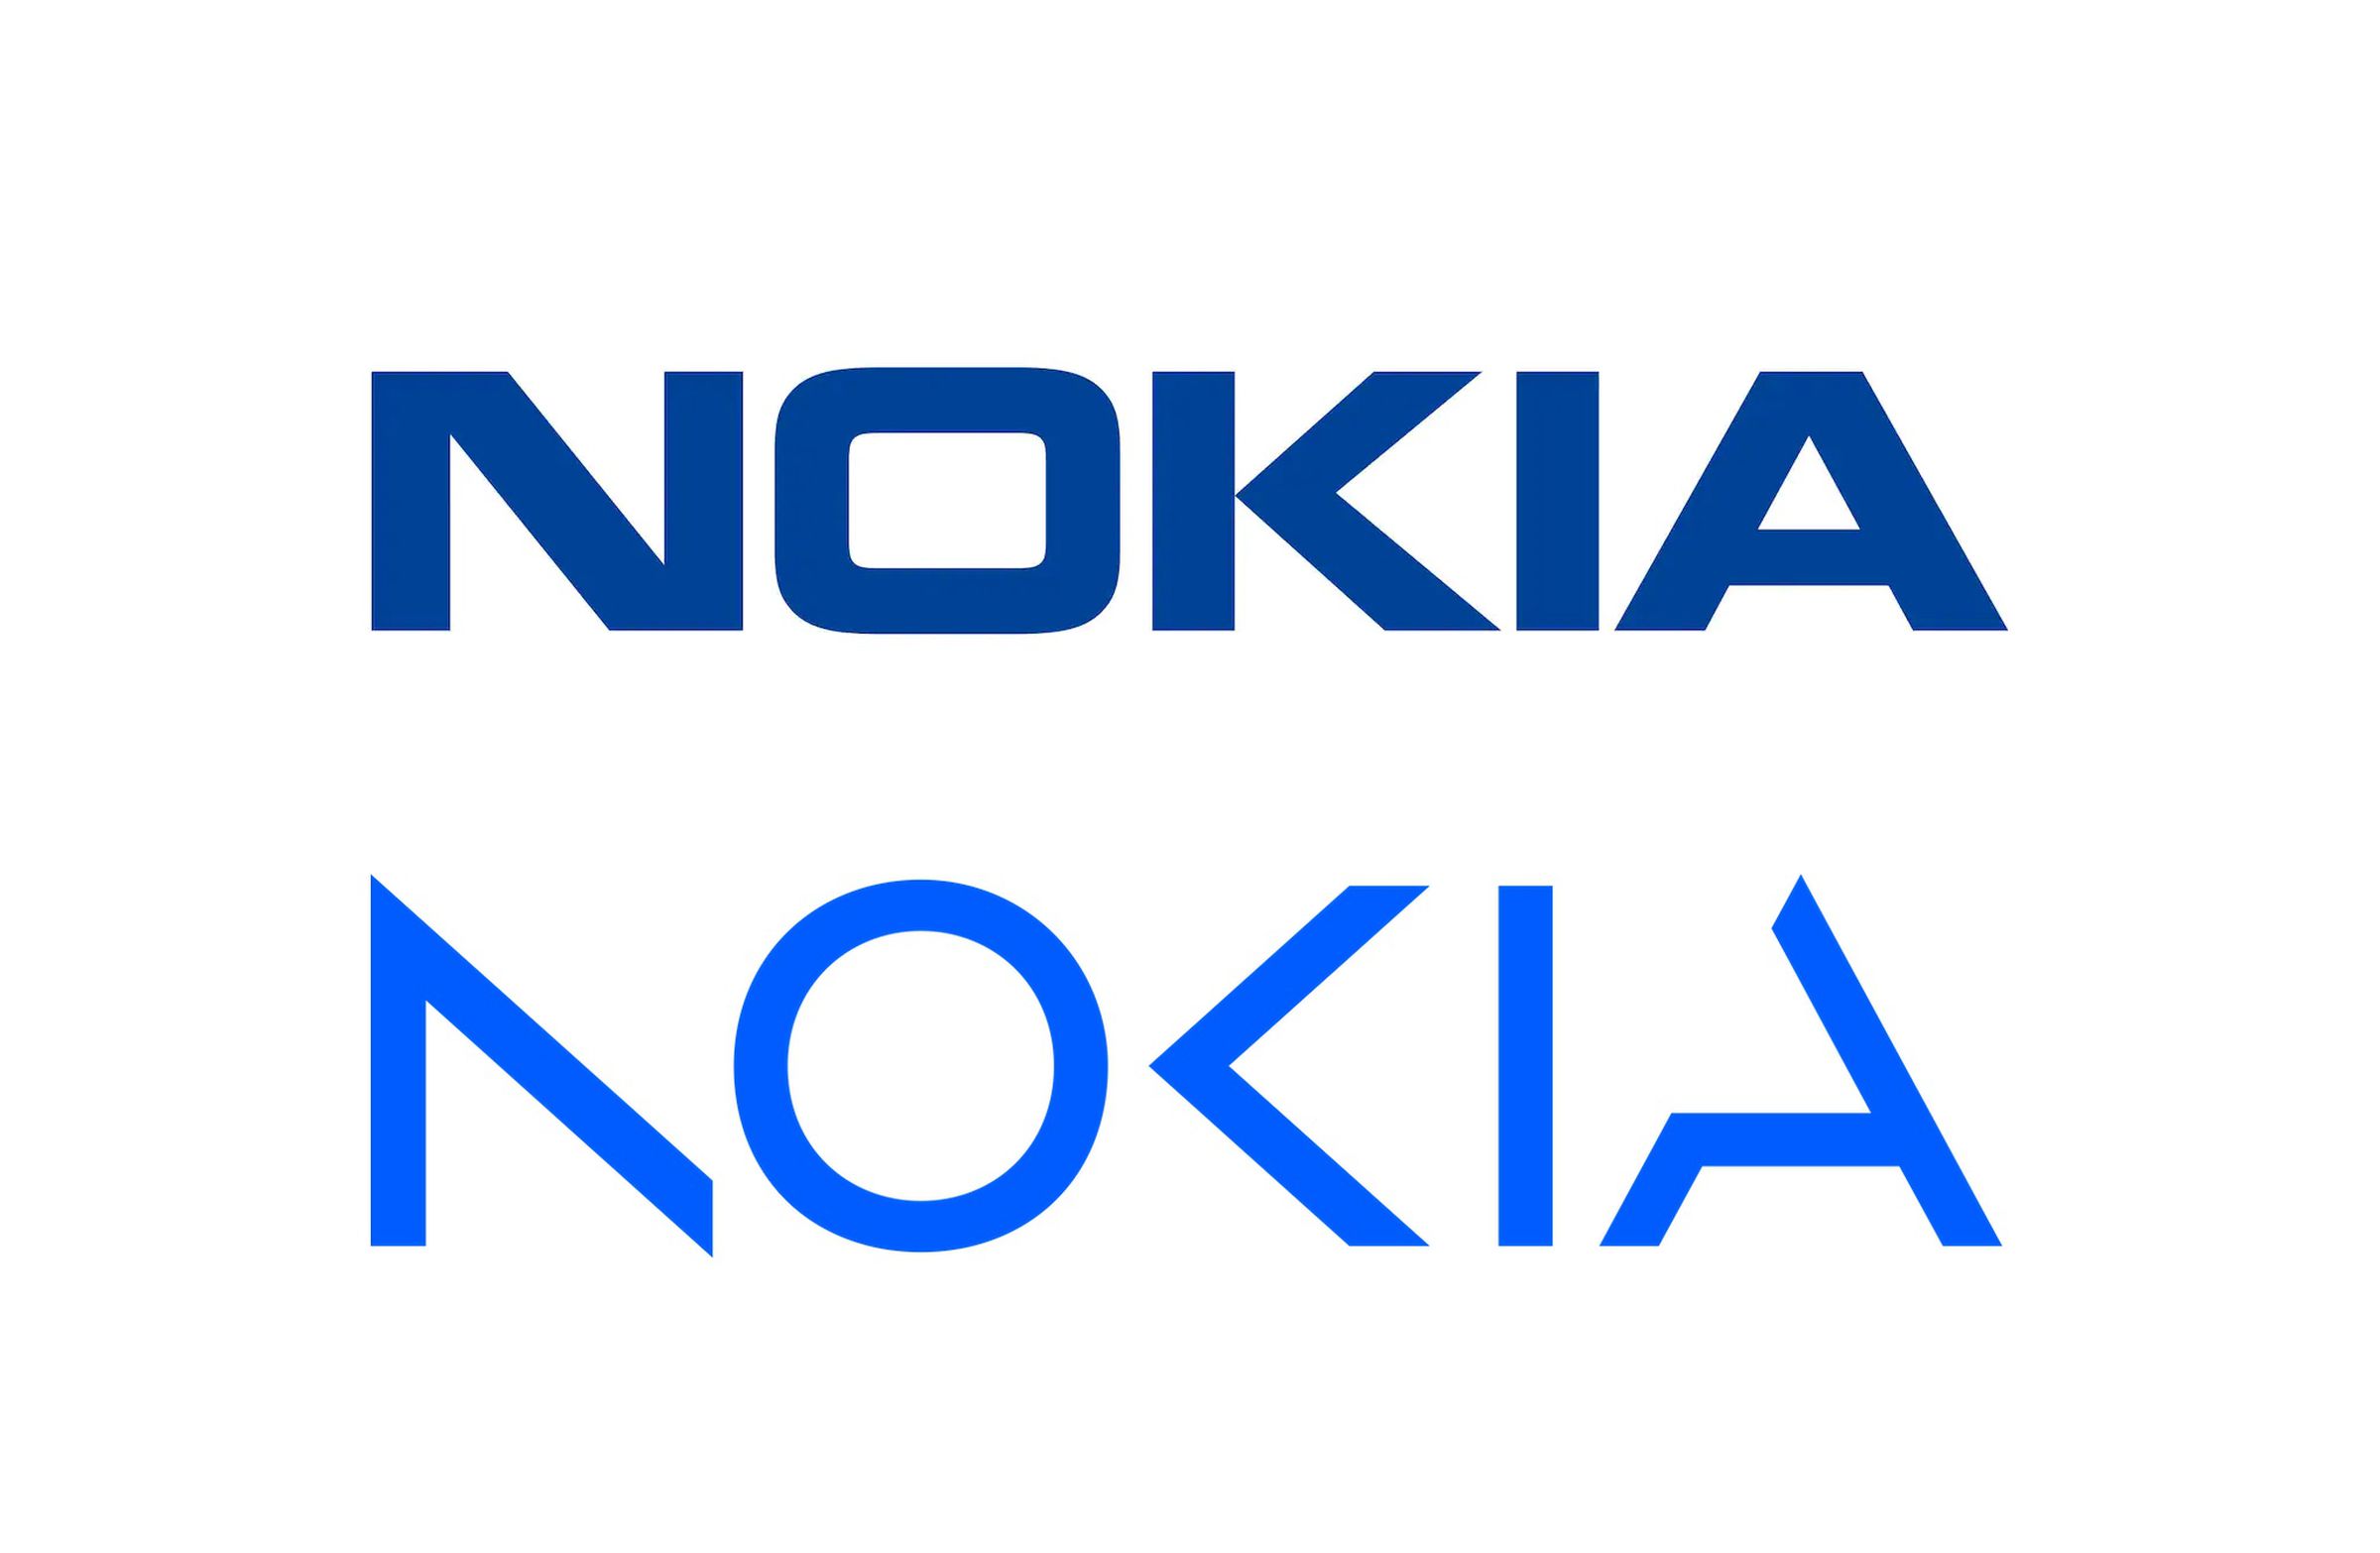 Images showing Nokia’s old and new logos.